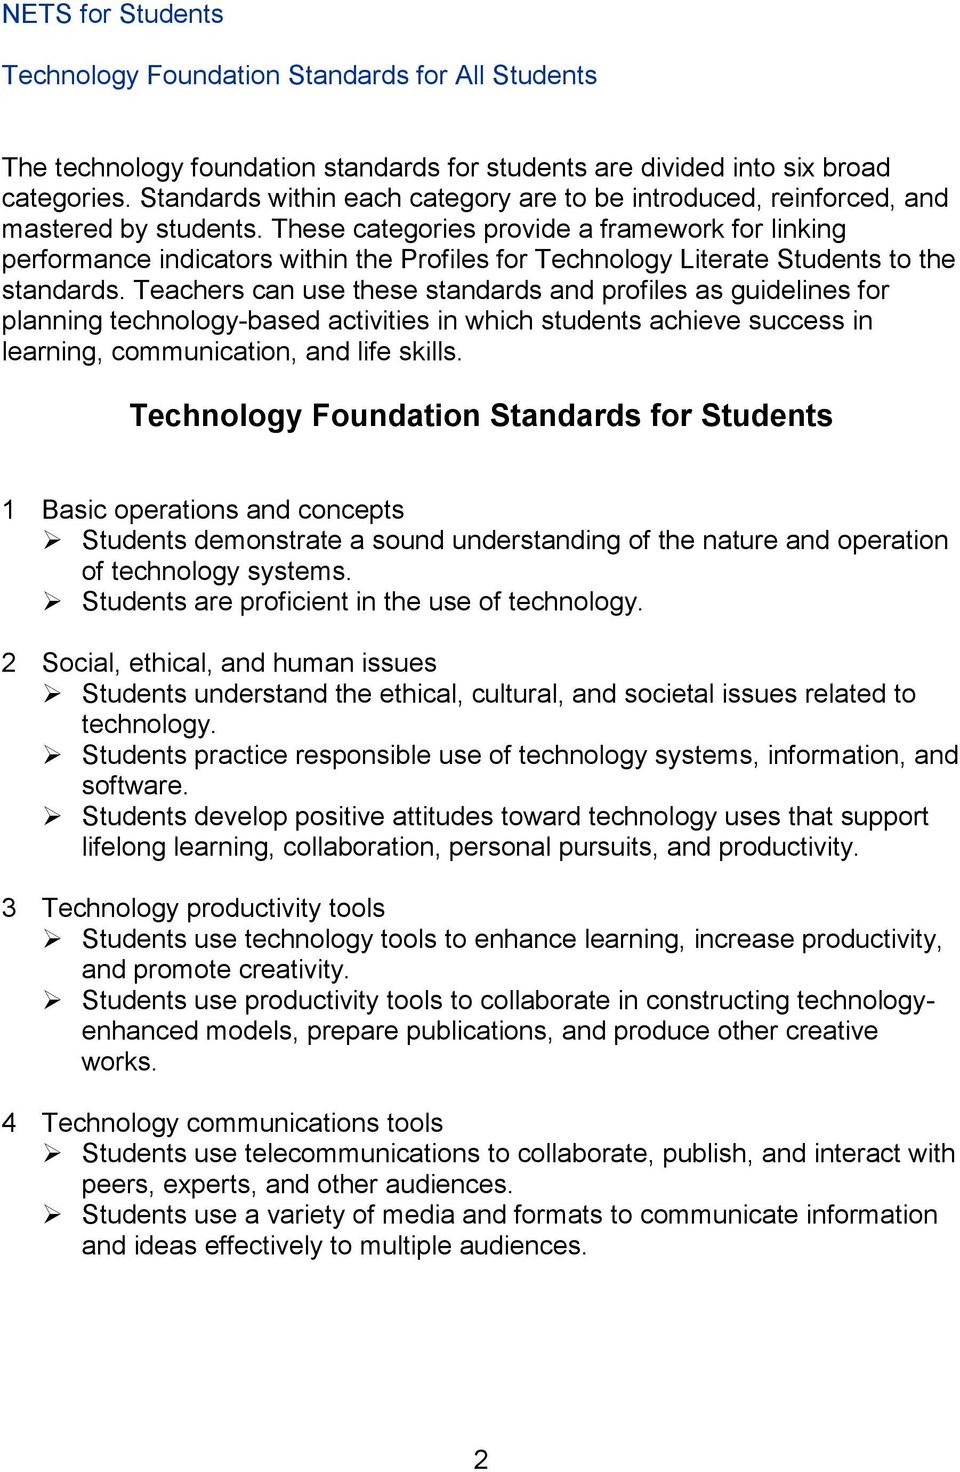 These categories provide a framework for linking performance indicators within the Profiles for Technology Literate Students to the standards.